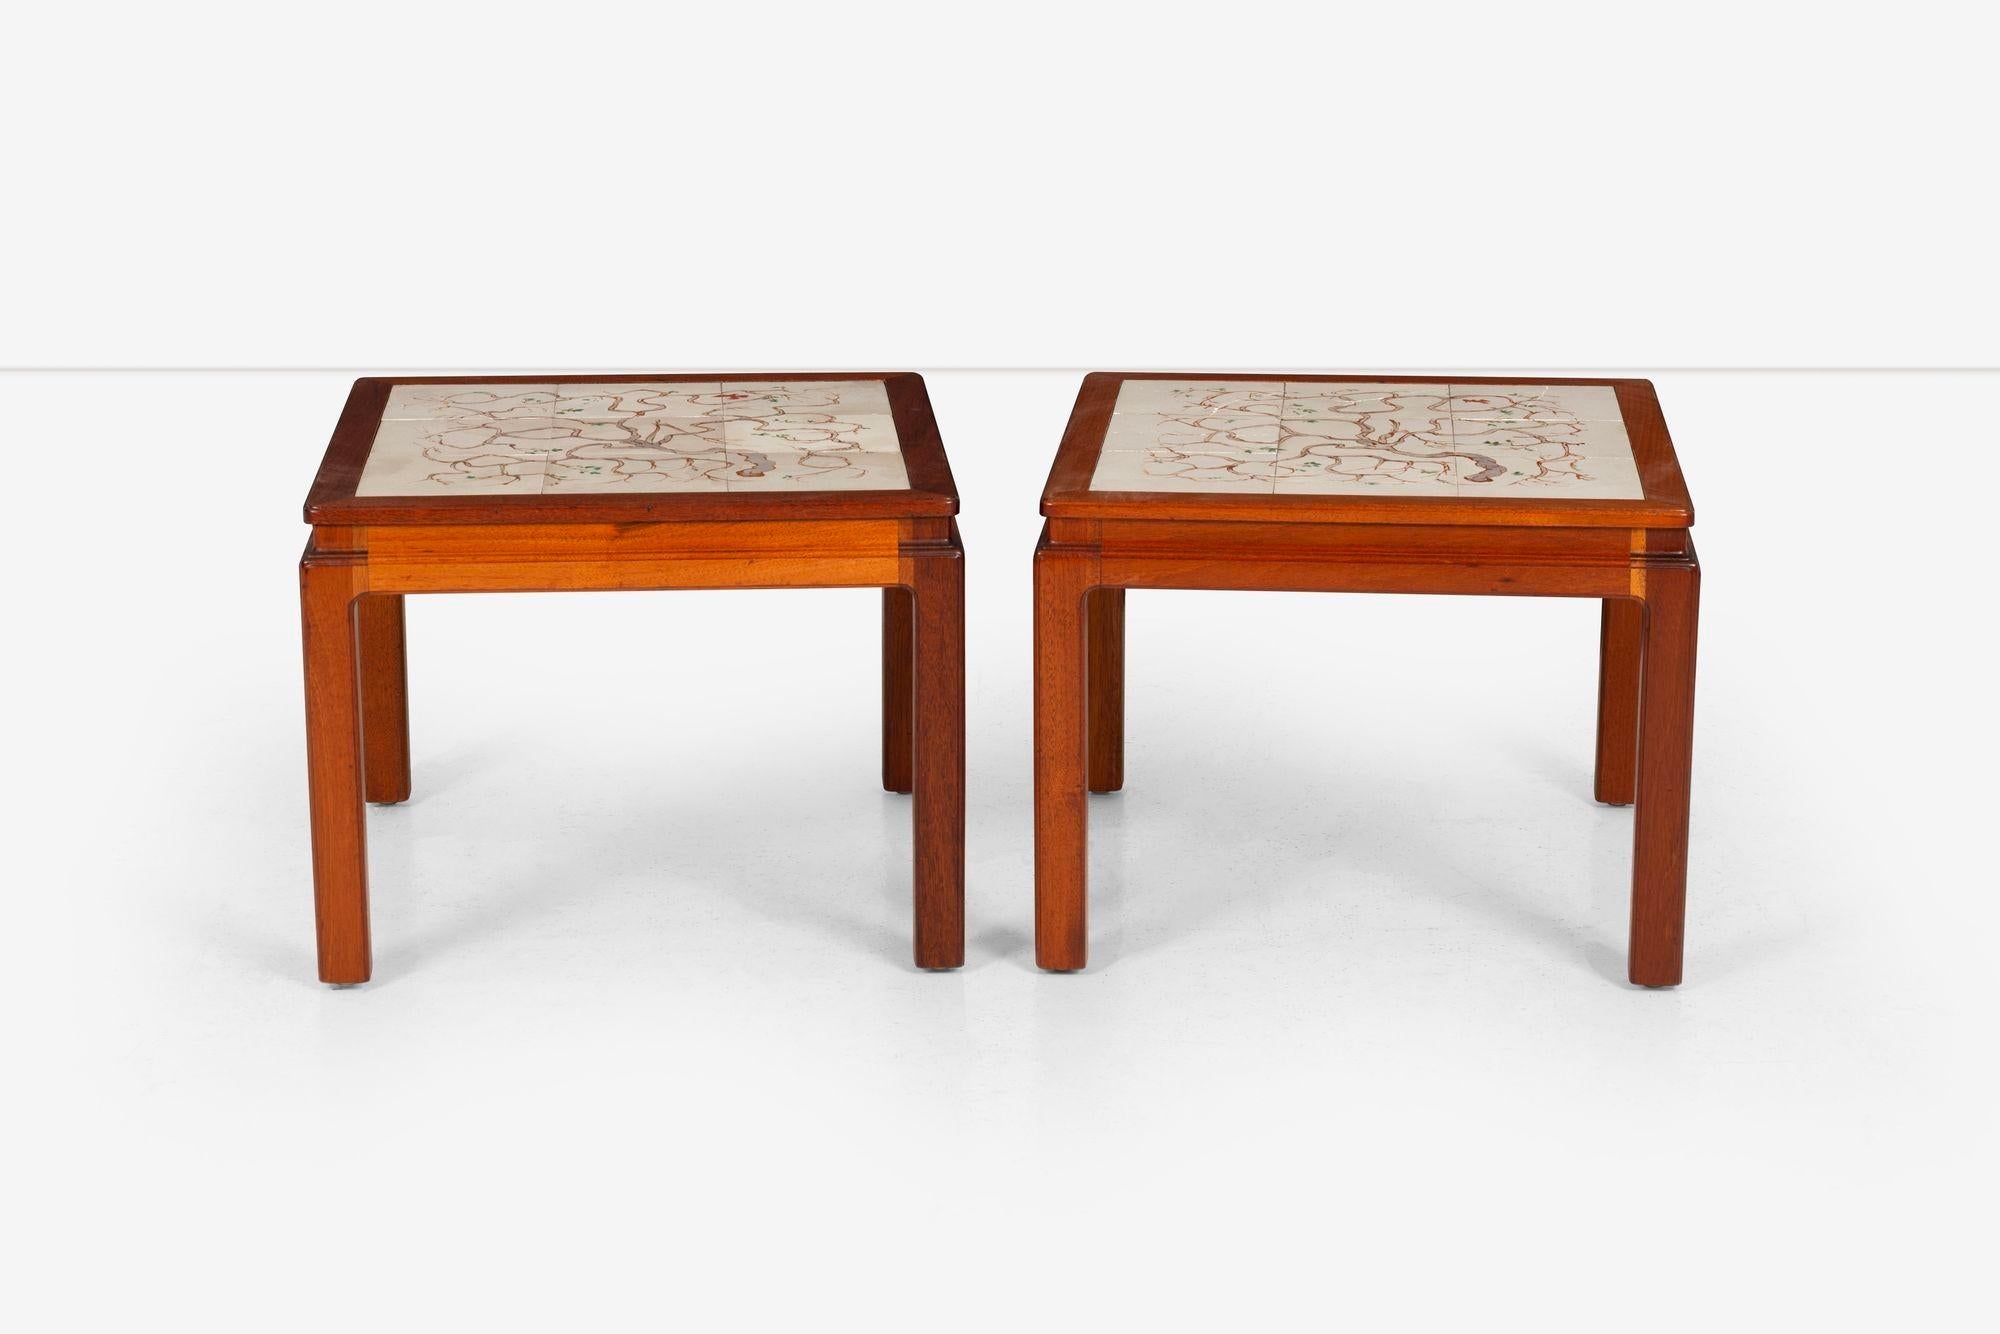 Pair of Parson End Tables by Edward Wormley for Dunbar with hand-painted tiles by Artist Maire Linna Wood frame with six hand-painted inset tiles depicting gnarled trees.
This is the first collaboration with Edward Wormley with the use of tiles,